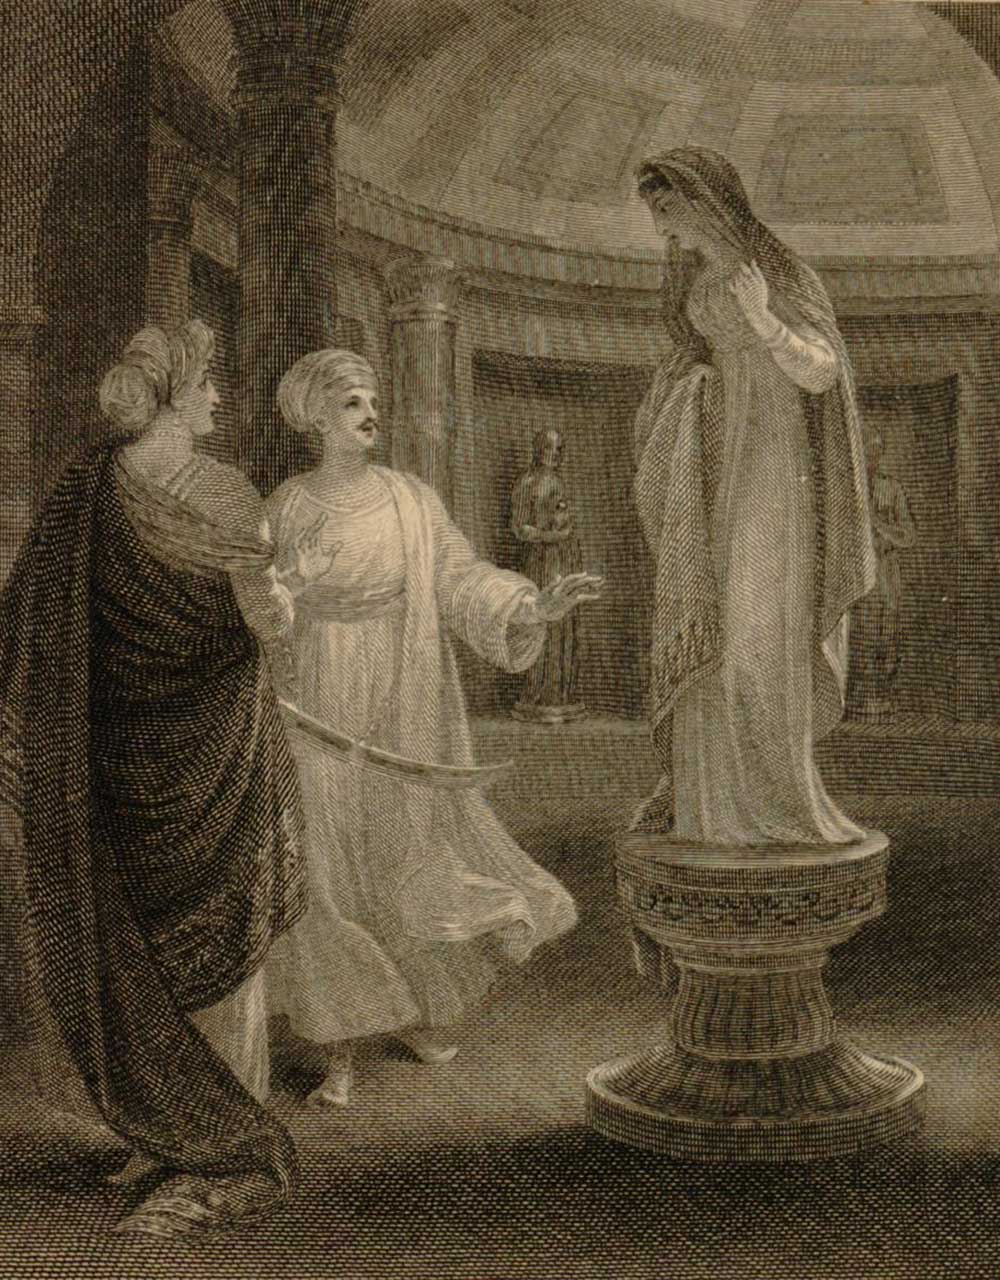 A woman and man in a circular hall look at a woman standing on a pedestal.